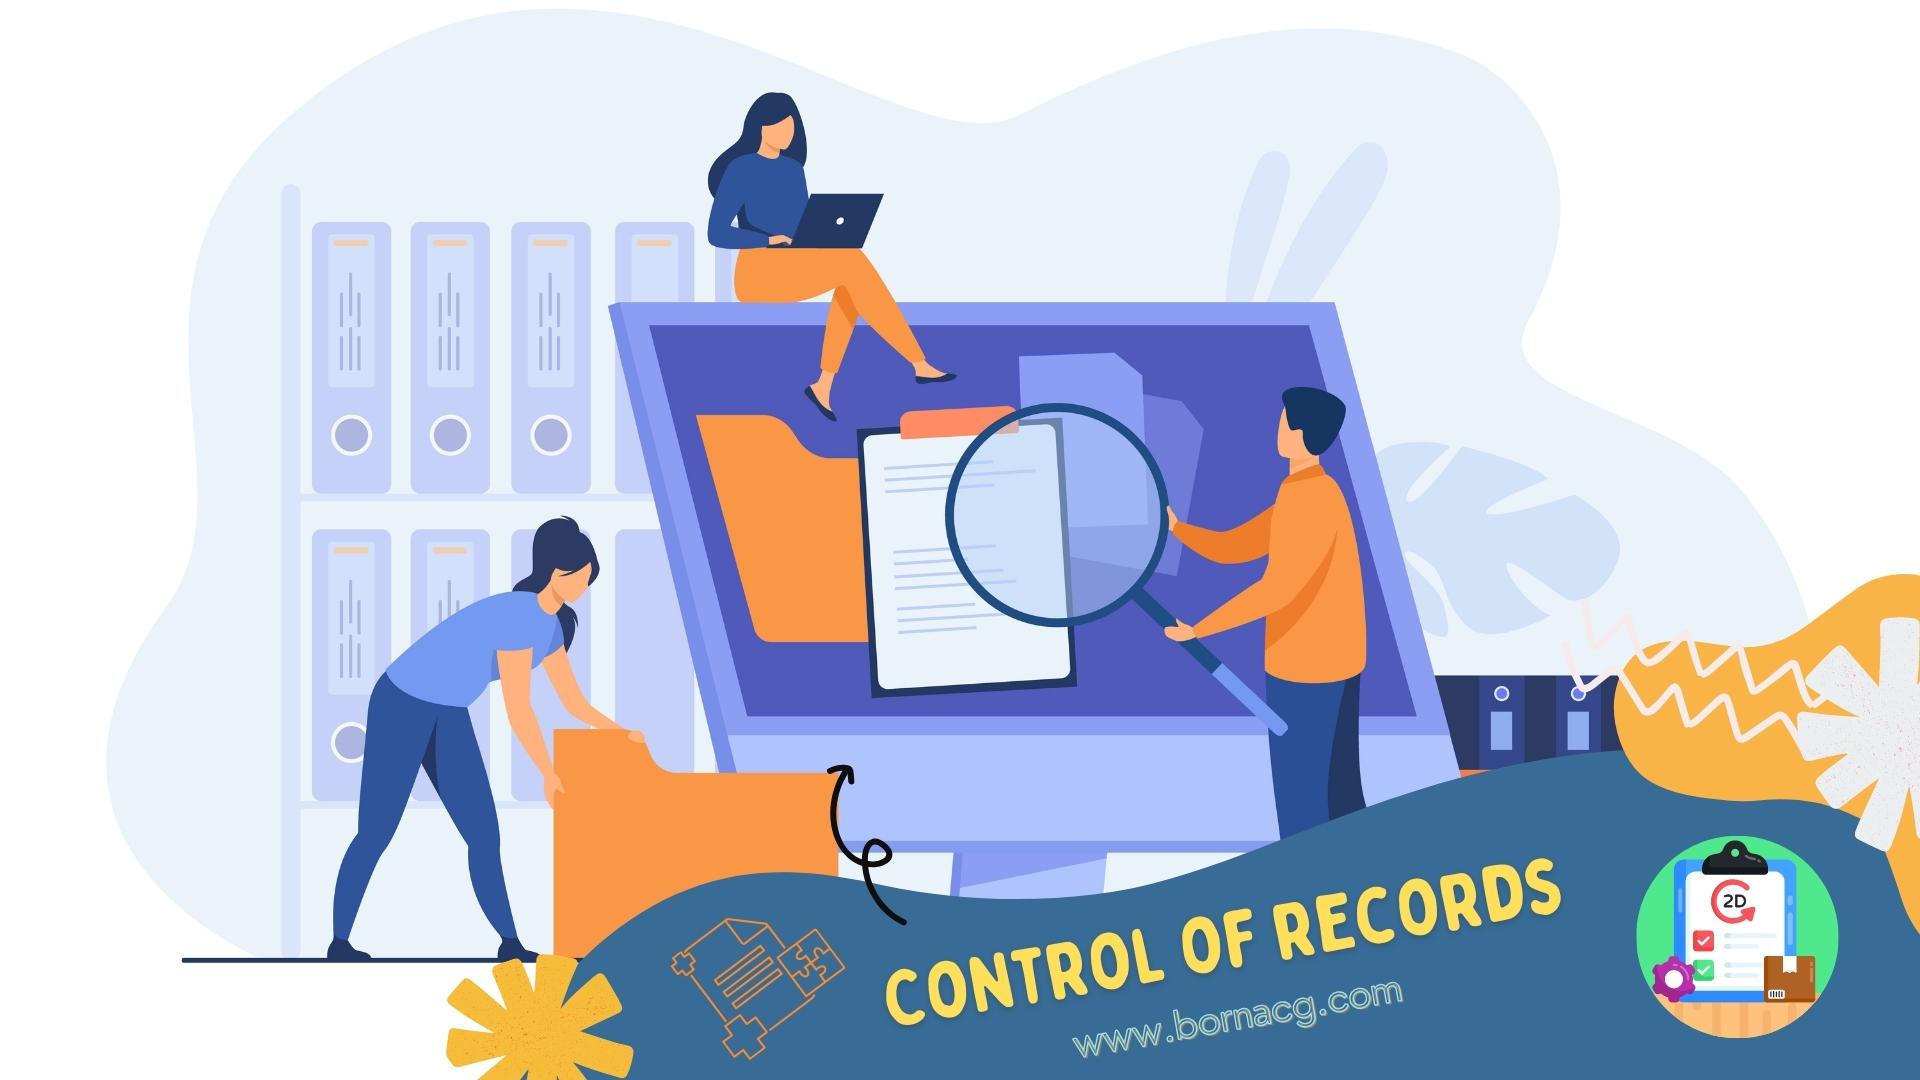 Control of records